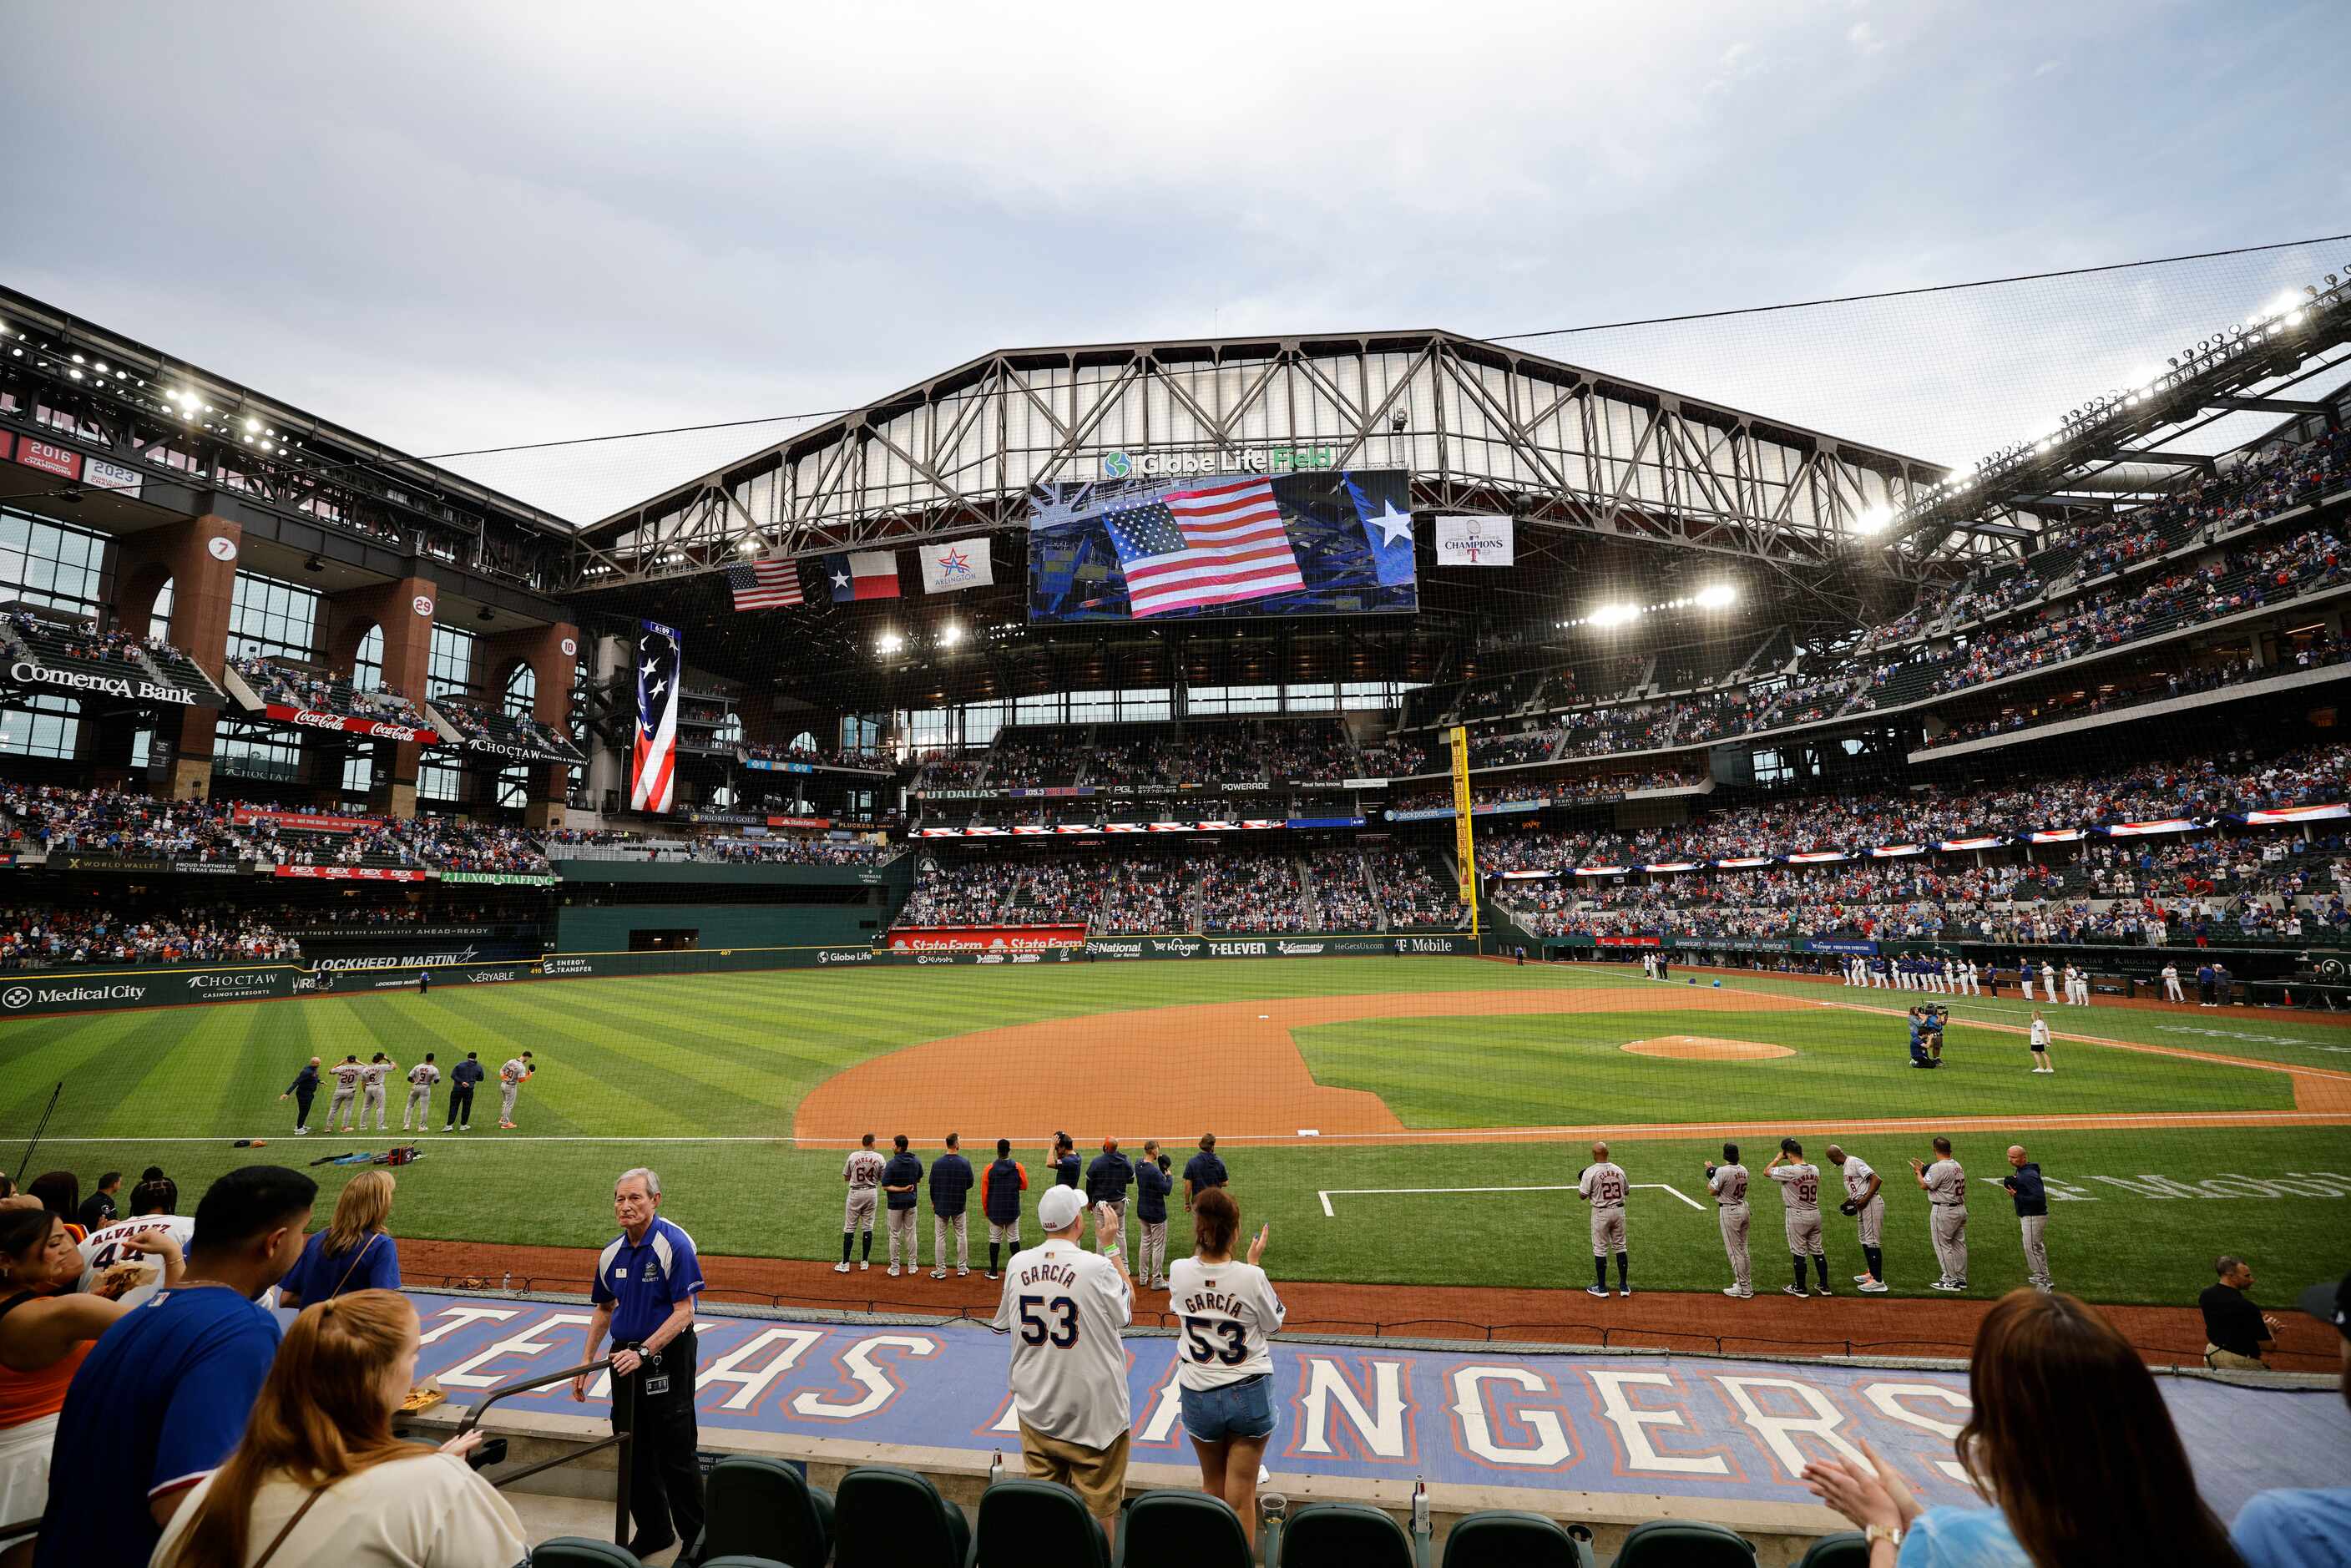 Players line up for the national anthem before a baseball game between Texas Rangers and...